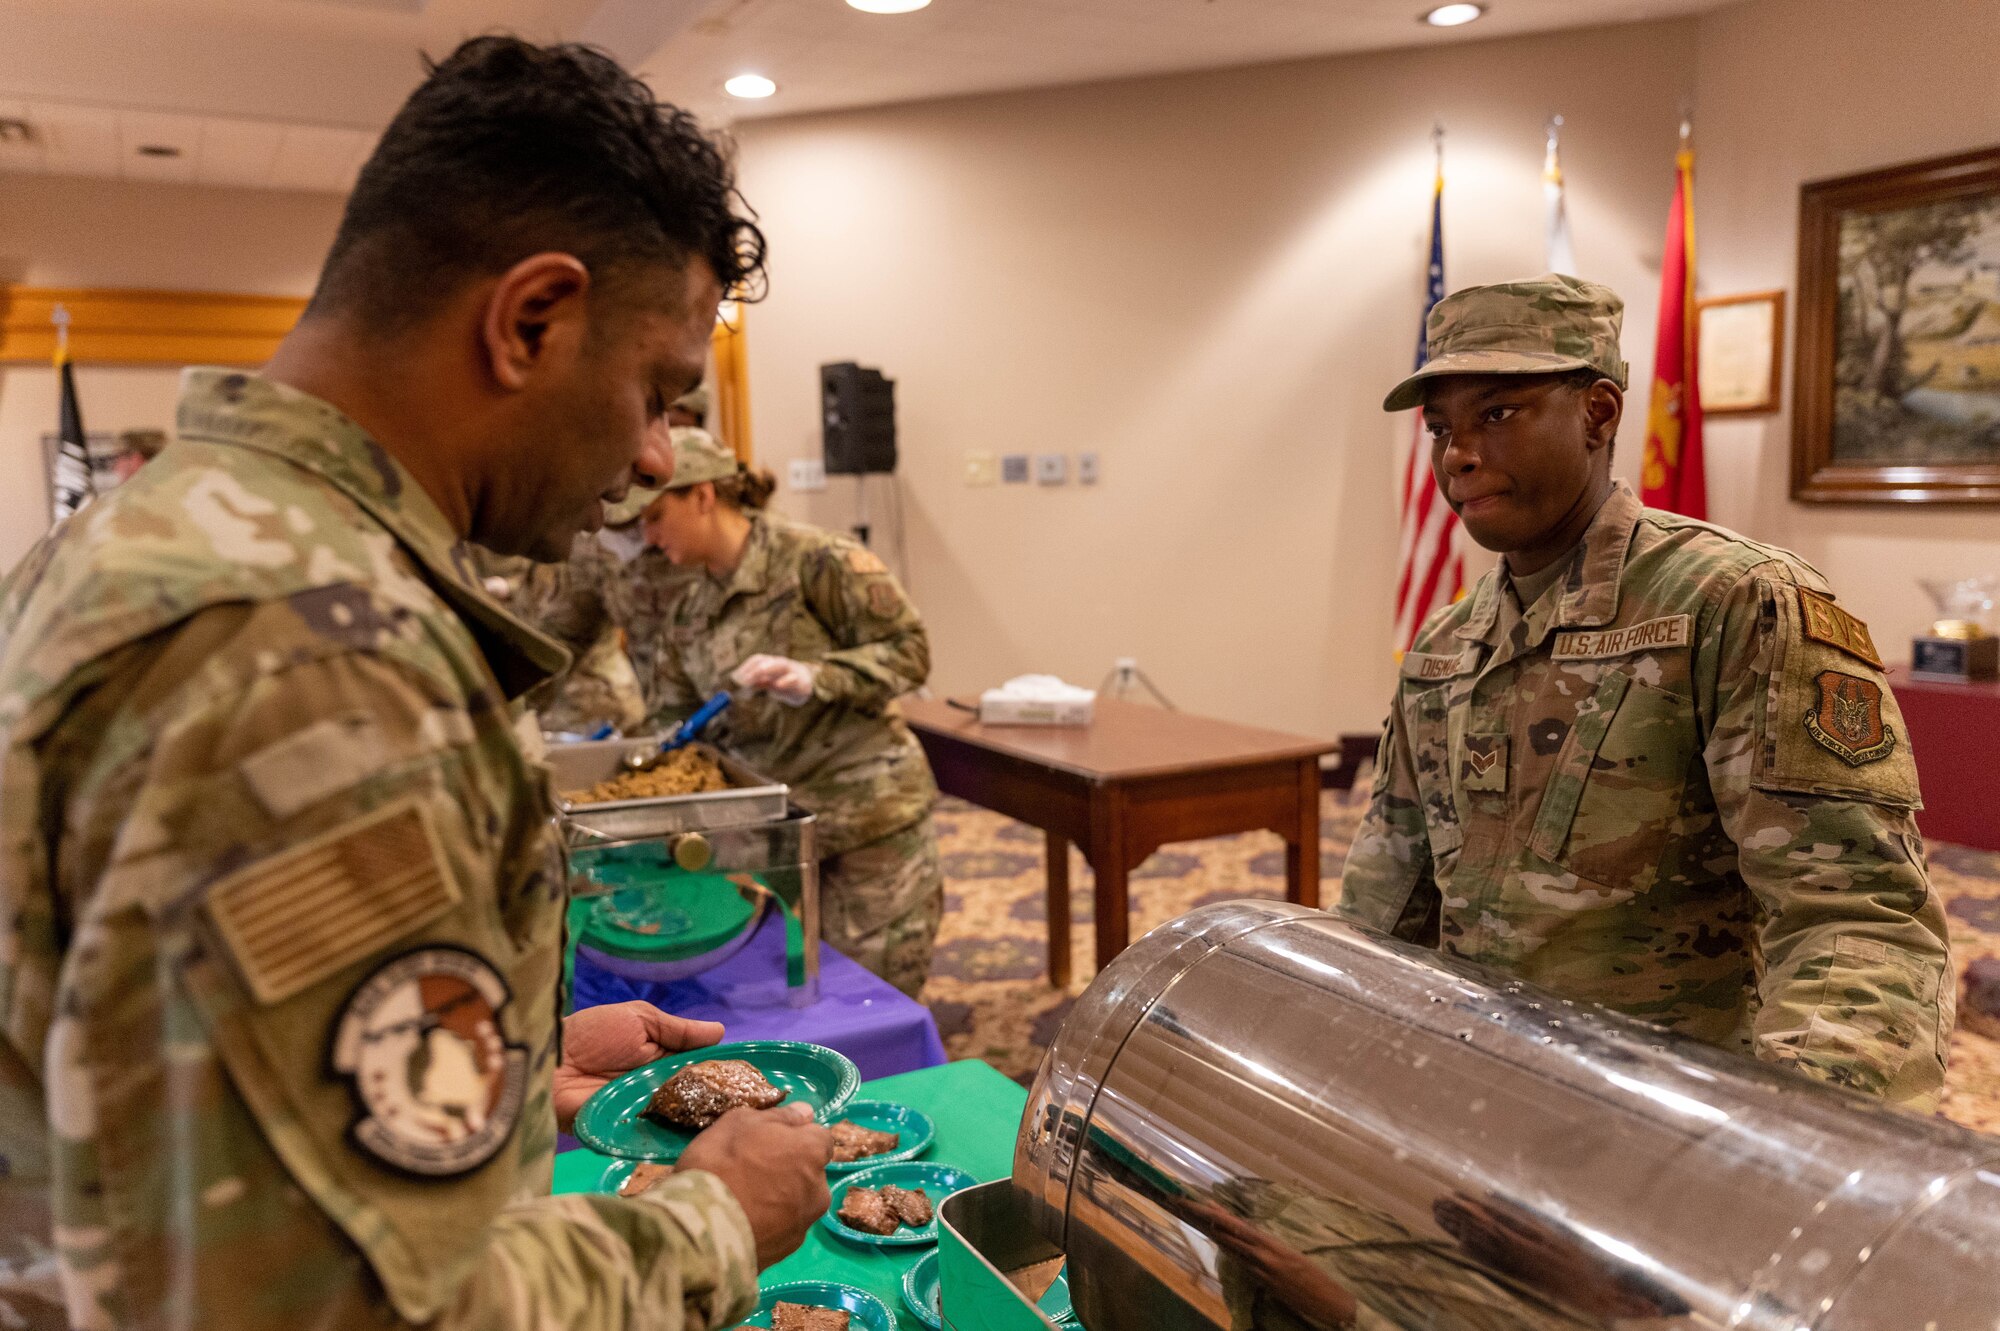 Staff Sgt. Gerrard Perera, left, 934th Force Support Squadron fitness center noncommissioned officer, receives a flank steak from, Senior Airmen Khadesa Dismuke, right, 934th Force Support Squadron services specialist, during the 934th Airlift Wing’s Celebration of Nations at Minneapolis-Saint Paul Air Reserve Station, Minnesota, Nov. 5, 2022. This event provided Airmen an opportunity to try culturally different foods, listen to different music and look at different types of clothes.  (U.S. Air Force photo by Airman First Class Colten Tessness)